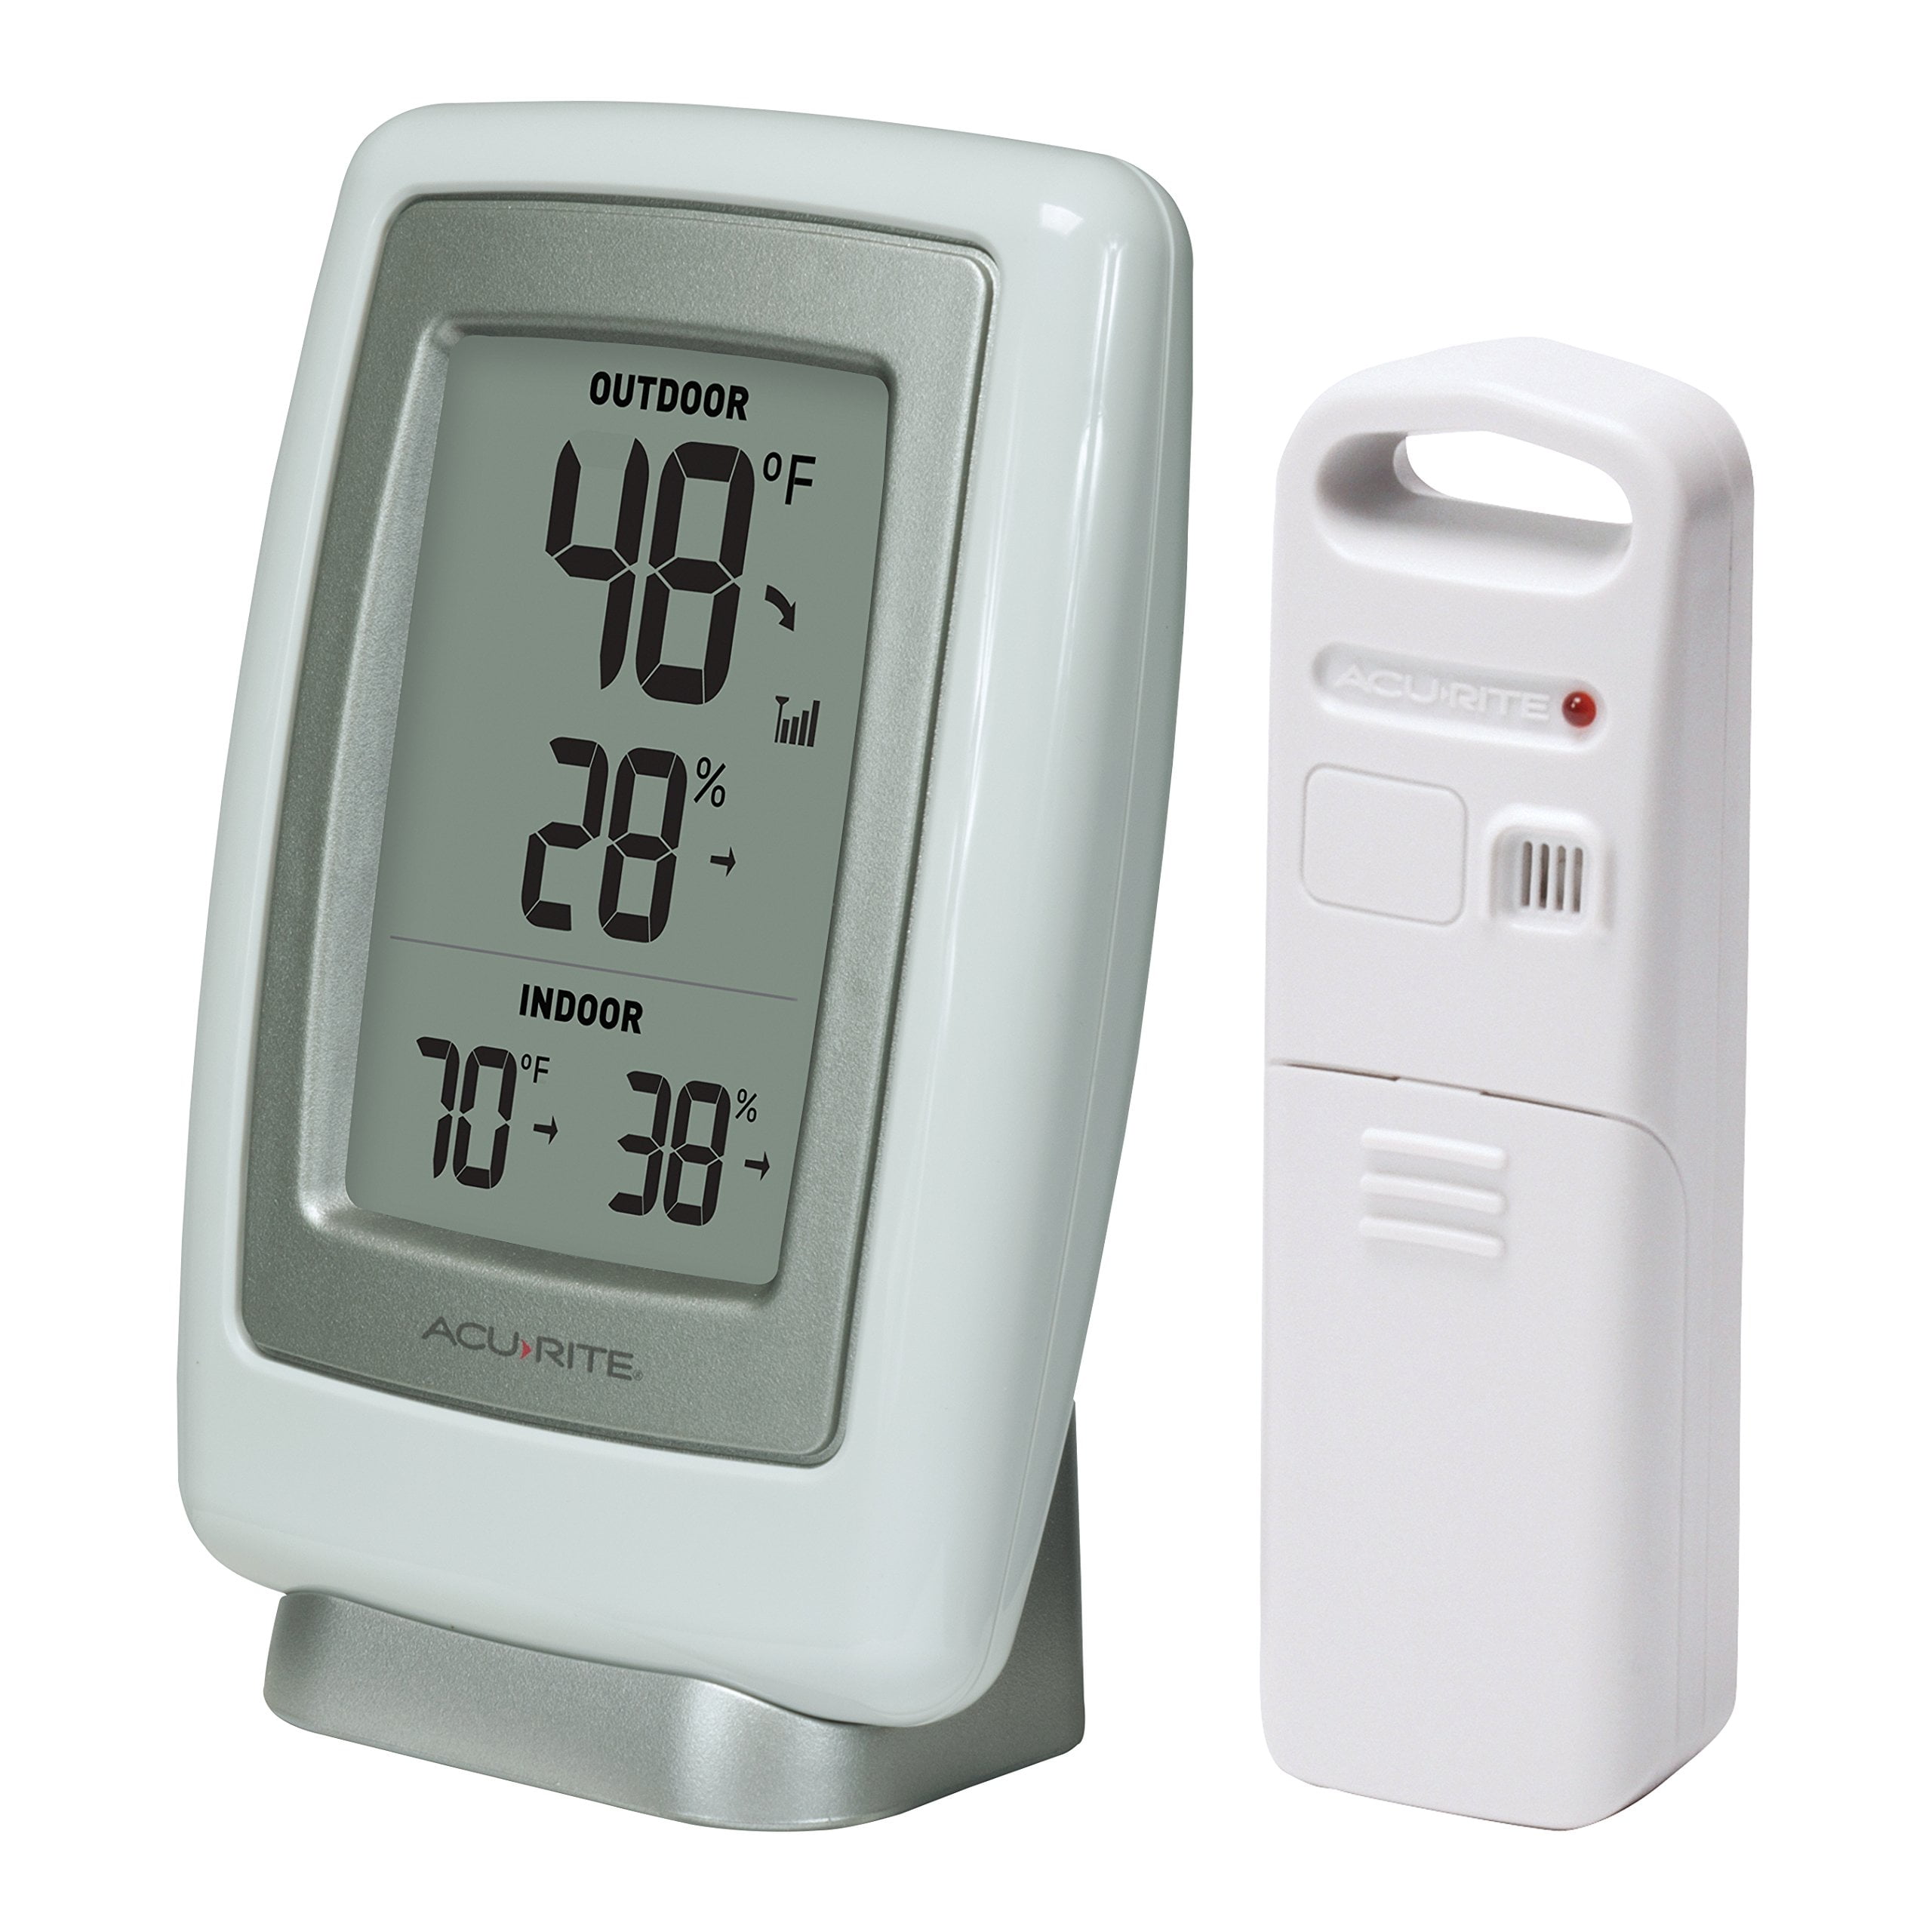 ACURITE 00611A3 Digital Thermometer,4-13/16 H,3-1/2 W G7428596ACURITE  00611A3 Digital Thermometer,4-13/16 H,3-1/2 W 